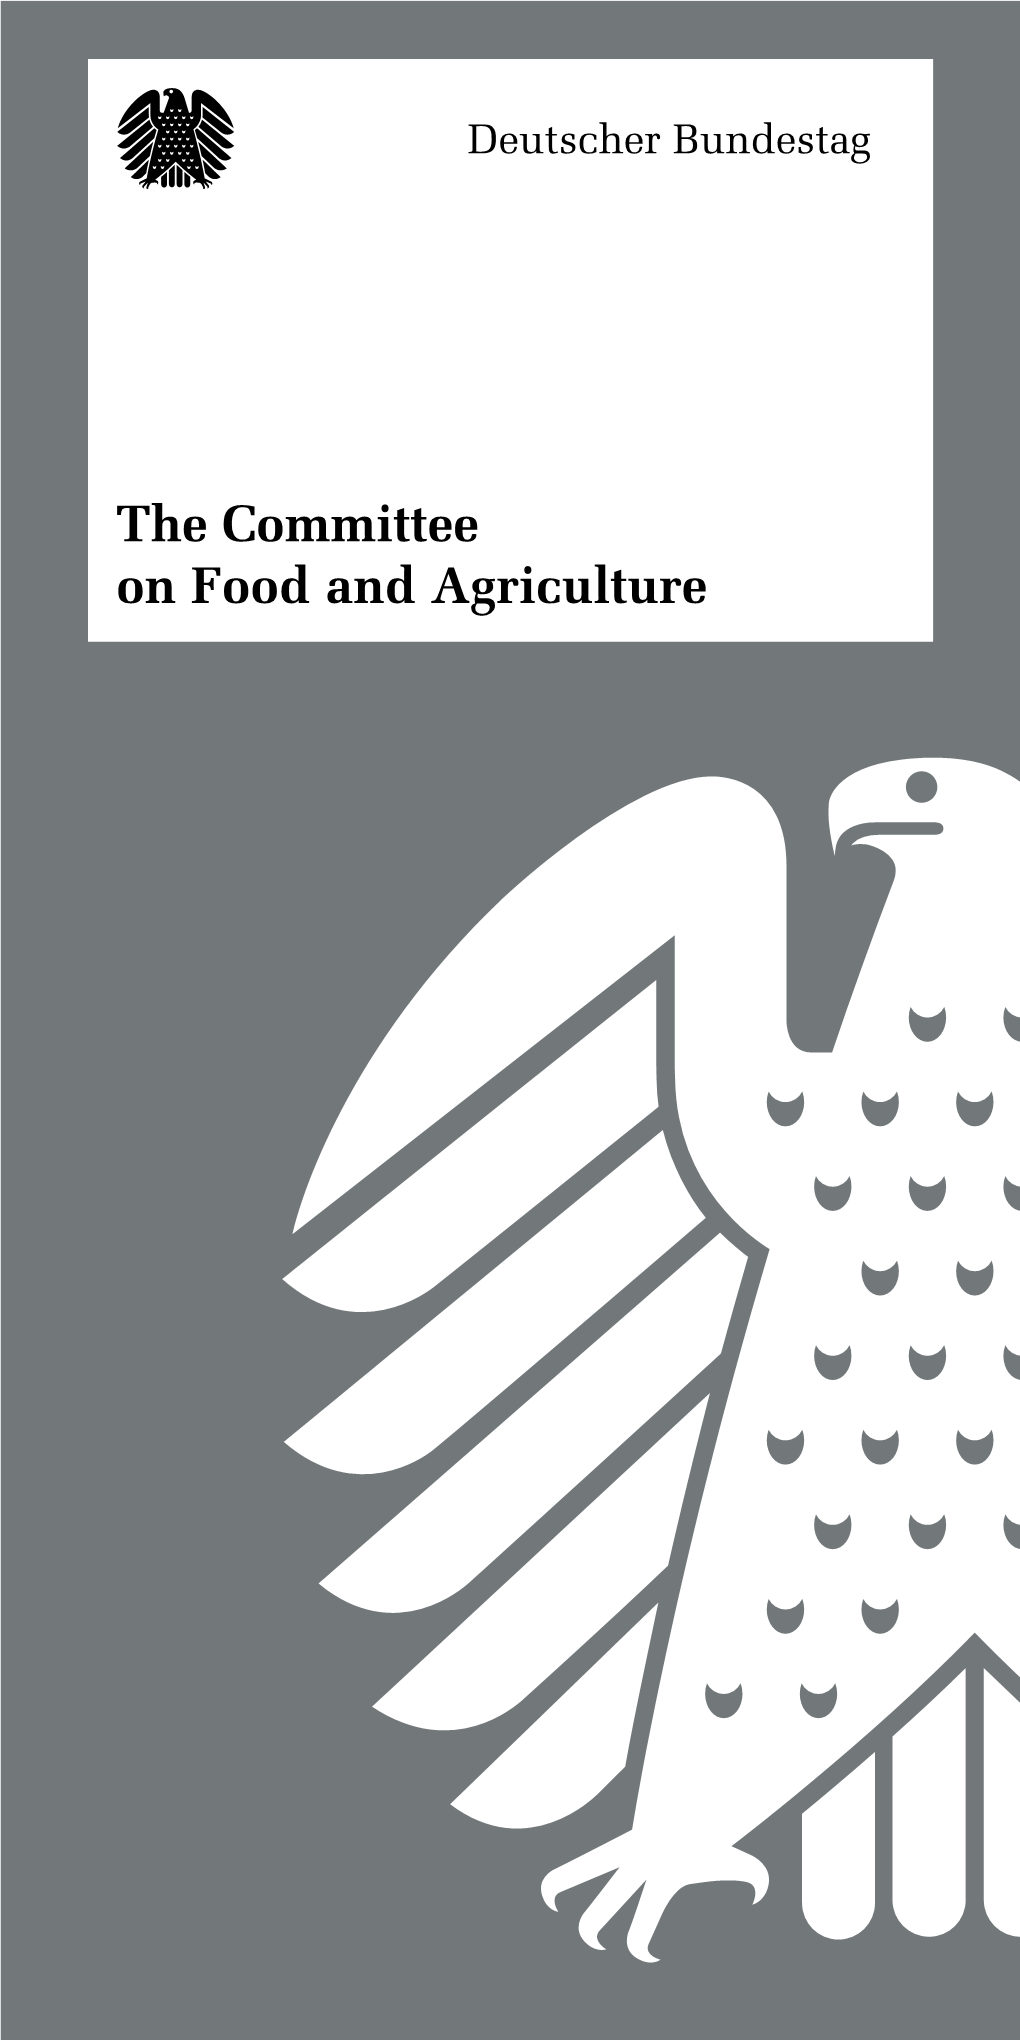 The Committee on Food and Agriculture 2 “The Committee on Food and Agri- Culture Deals with a Wide Range of Issues